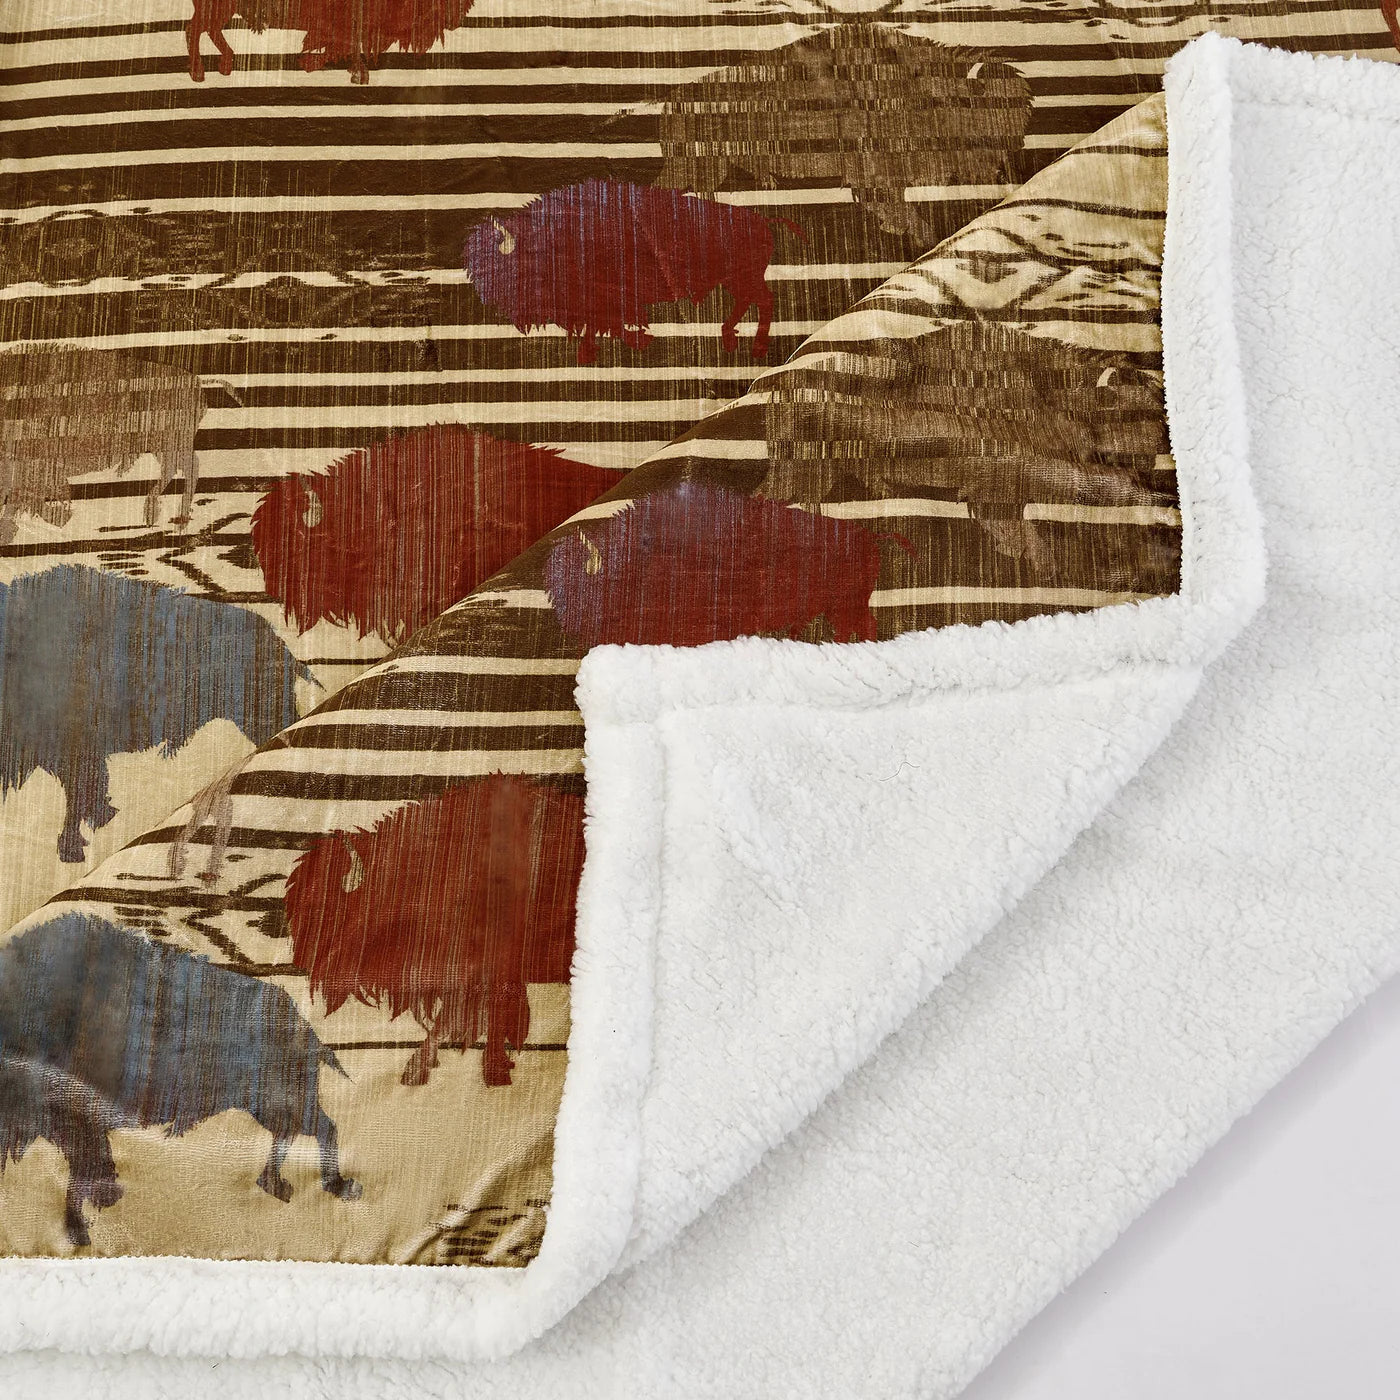 Bring the spirit of the West into any space with the Range Campfire Sherpa Throw. This lightweight blanket features a majestic buffalo herd and Aztec patterns in earthy and sky-inspired colors, and is finished with a cozy sherpa reverse for ultimate warmth and comfort. Easy-to-care-for materials make this throw an ideal, budget-friendly addition to any home.